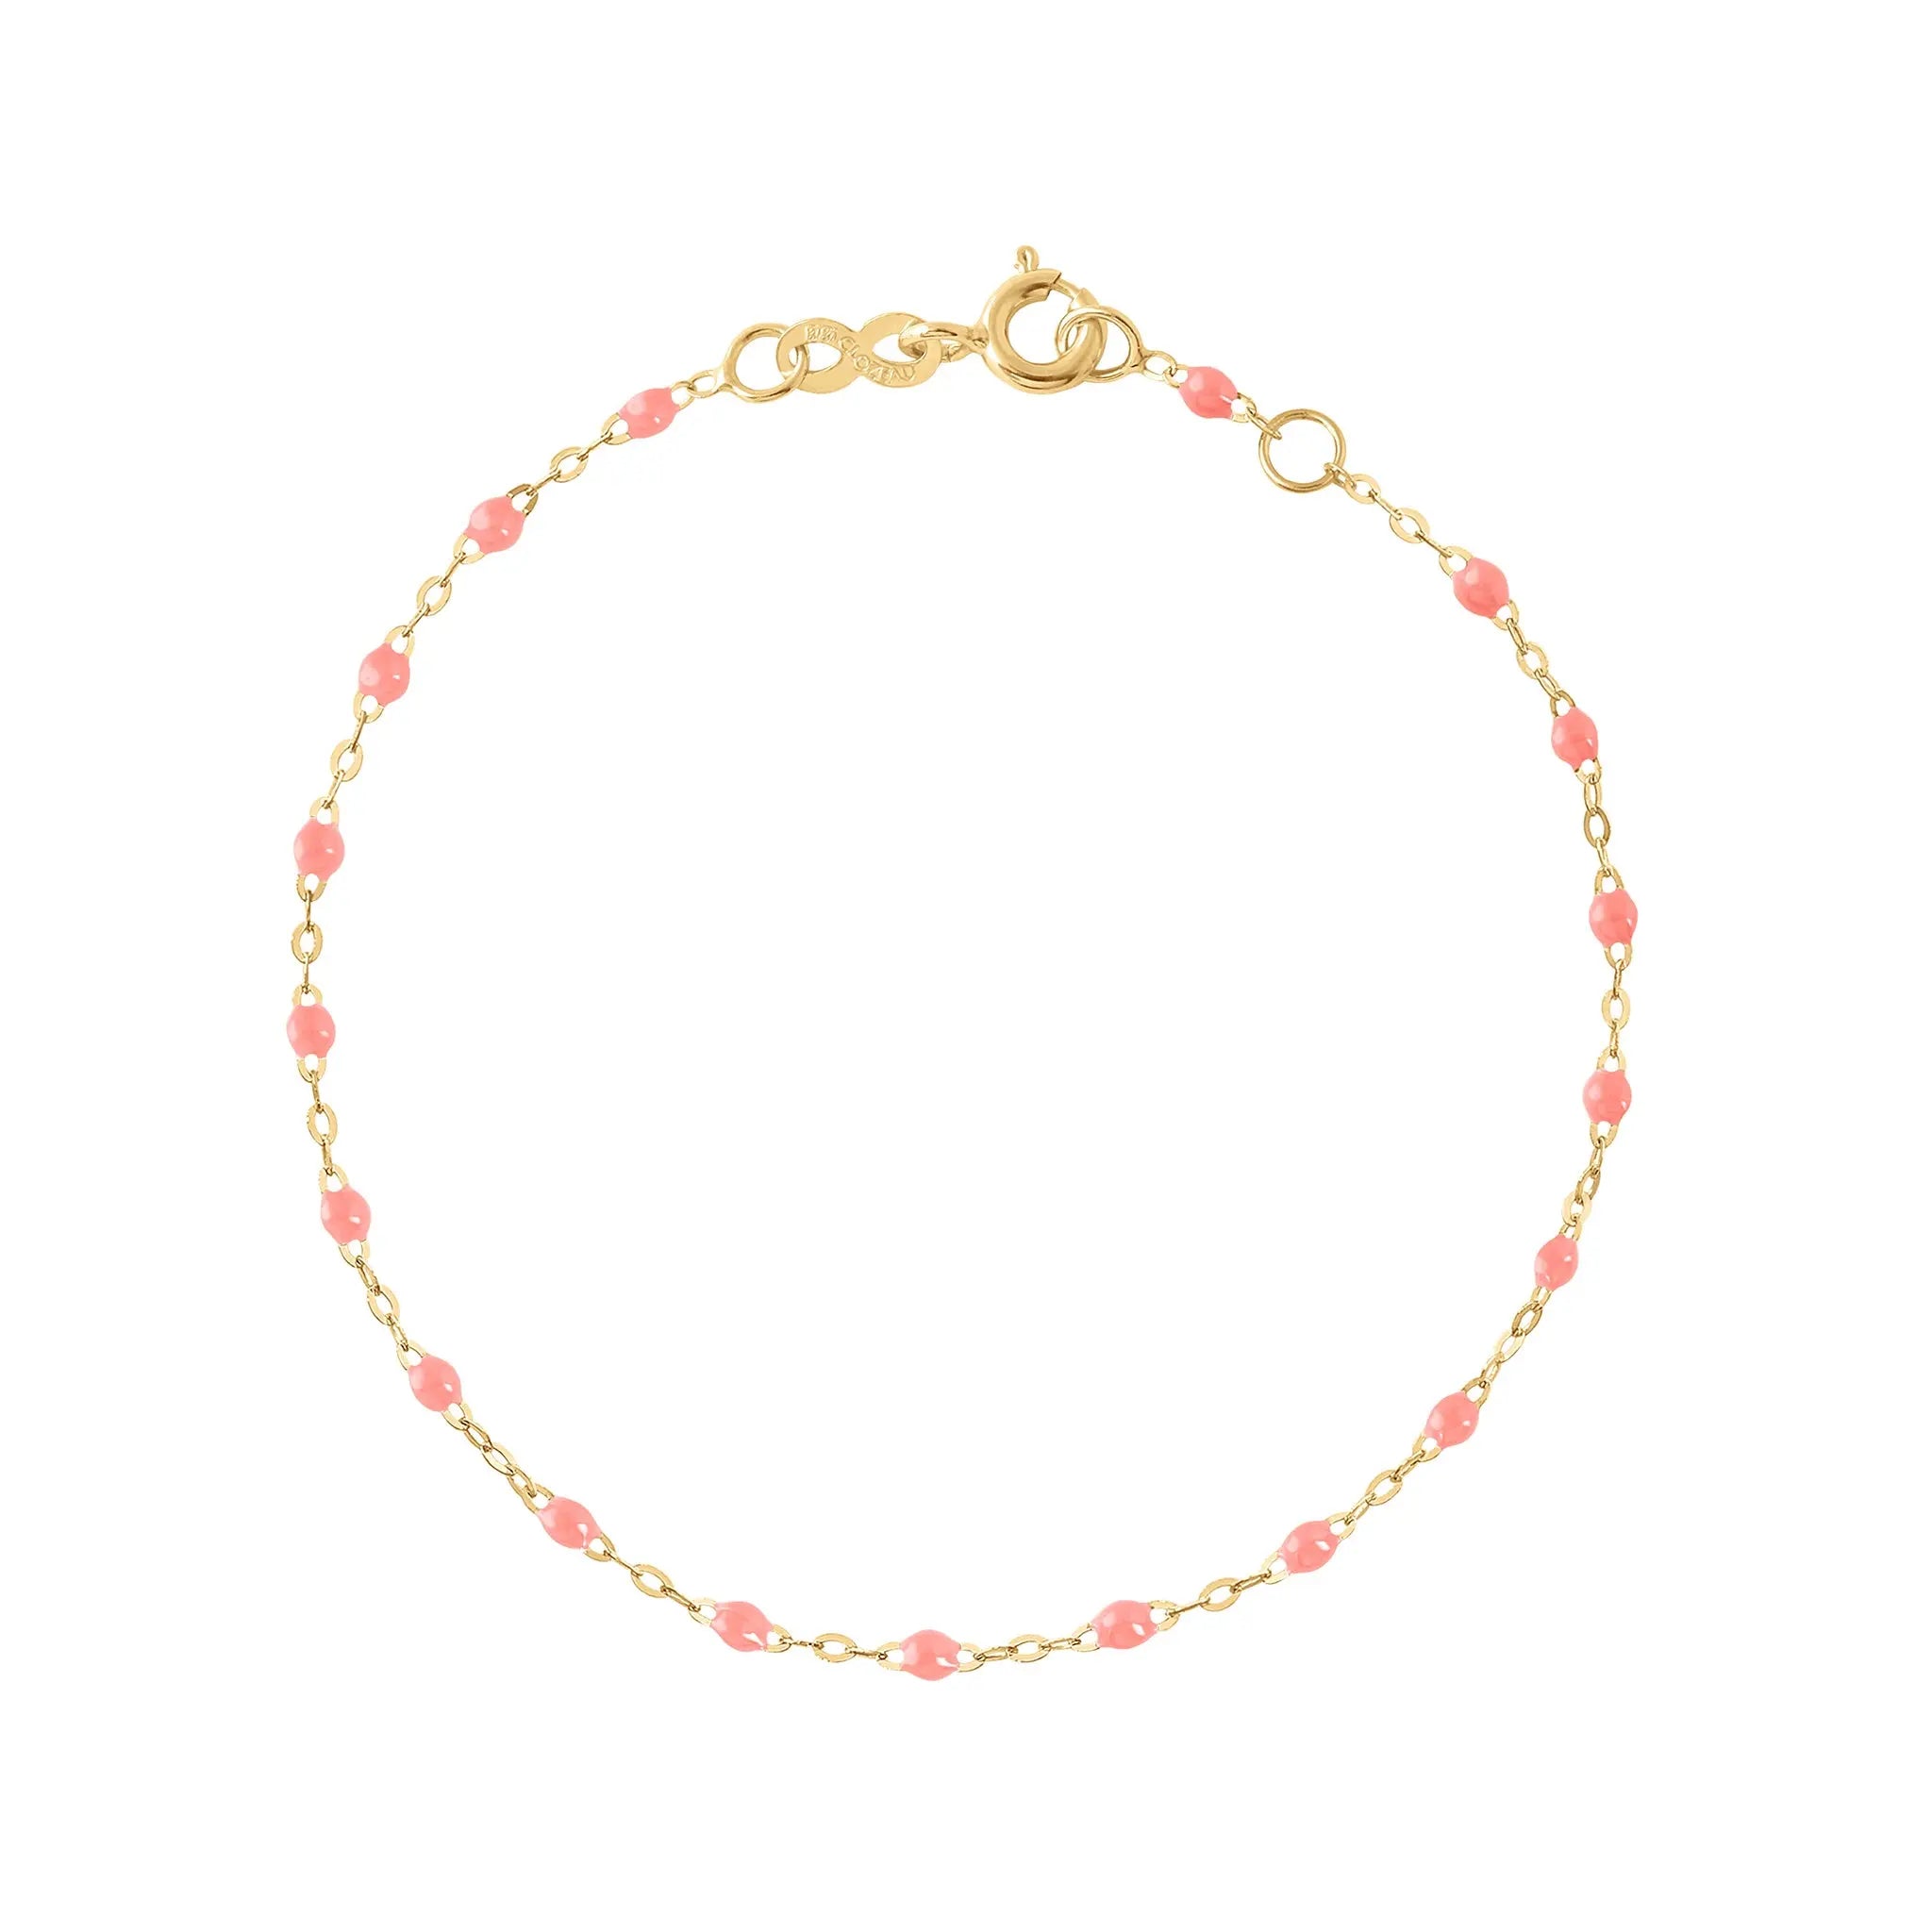 The Classic Gigi bracelet by gigi CLOZEAU features 18K Yellow Gold, and unique Fushsia jewels for a simple, everyday look.   Each jewel is unique, artisanally made in their family-owned workshop. 18K yellow gold and resin. The bracelet measures 6.7 inches with adjustable clasp at 6.3 inches.